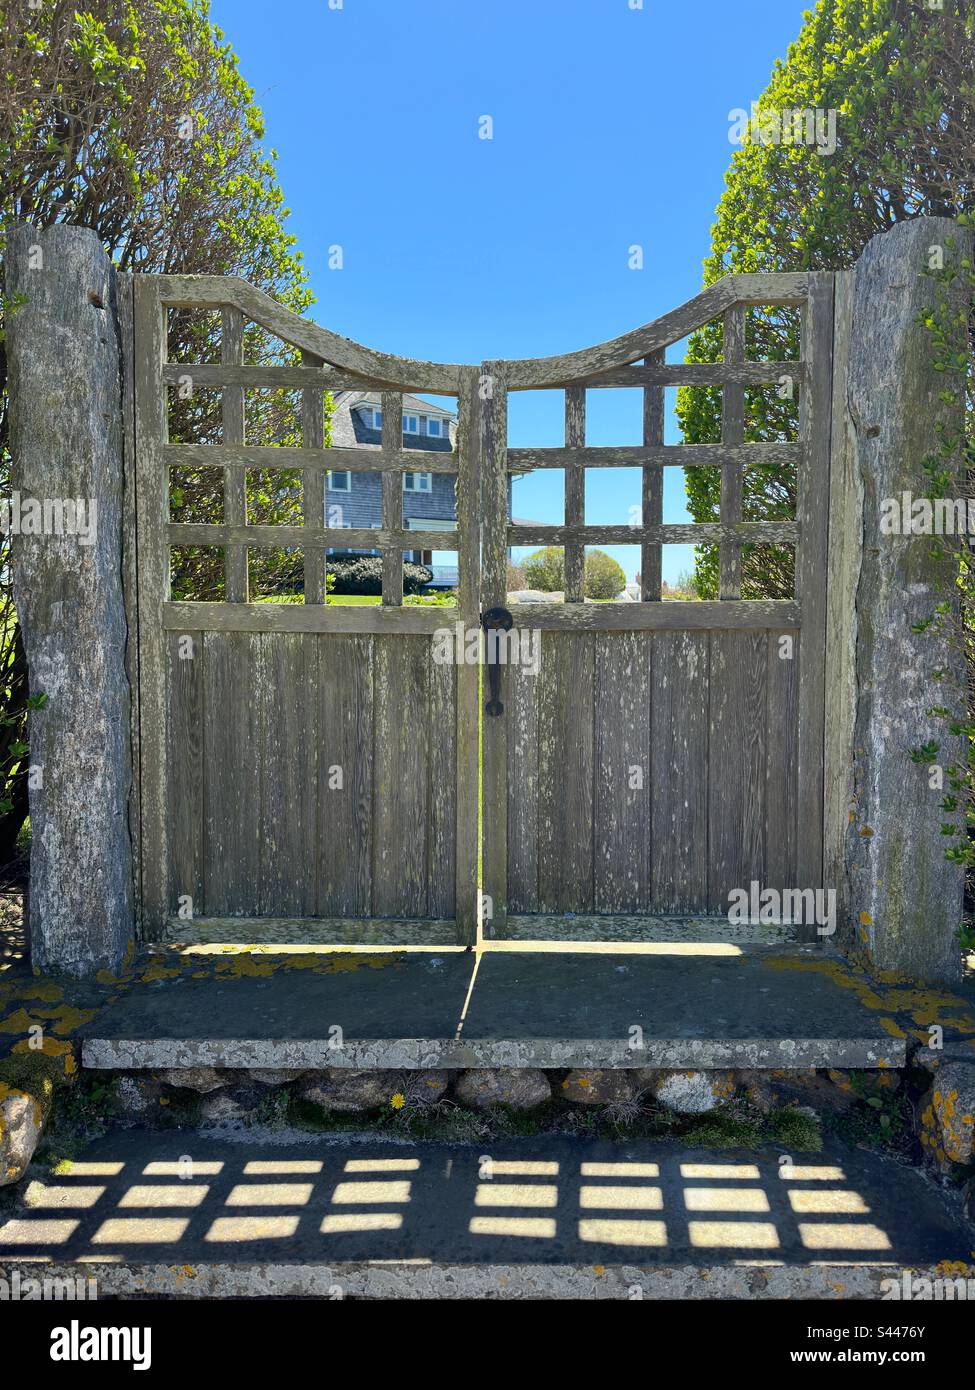 Watch Hill, Rhode Island, USA: Wooden gate with steps. Stone pillars and trees on each side that has light streaming through cracks in the gate.  House in the distance. Stock Photo